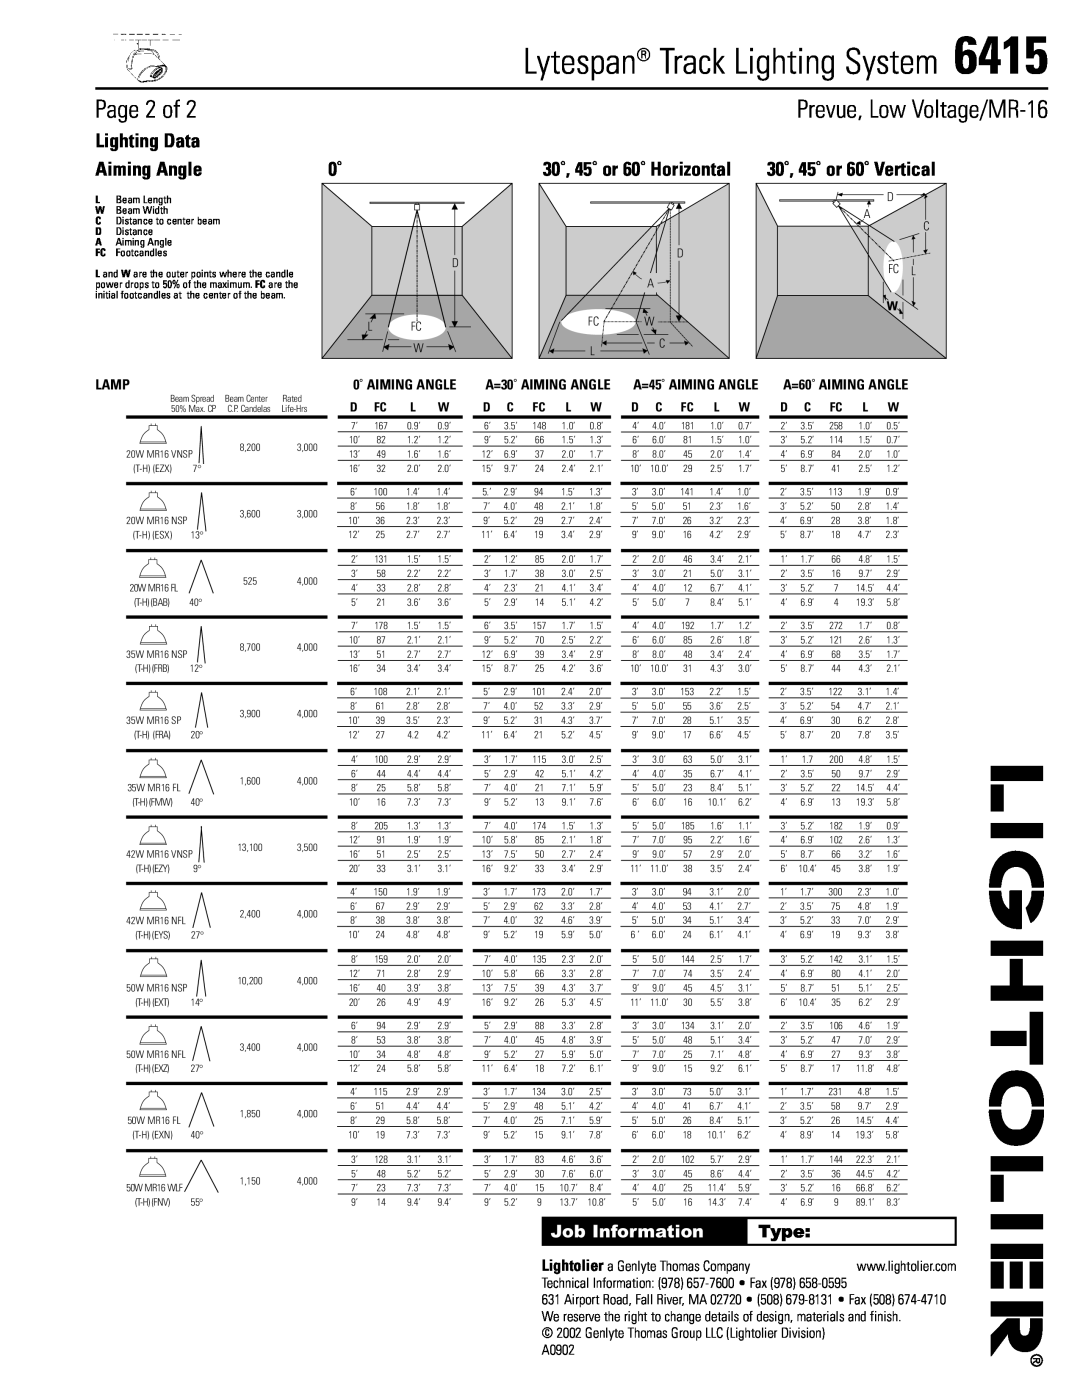 Lightolier 6415 Lytespan Track Lighting System, Page 2 of, Prevue, Low Voltage/MR-16, Lighting Data, Aiming Angle, Type 